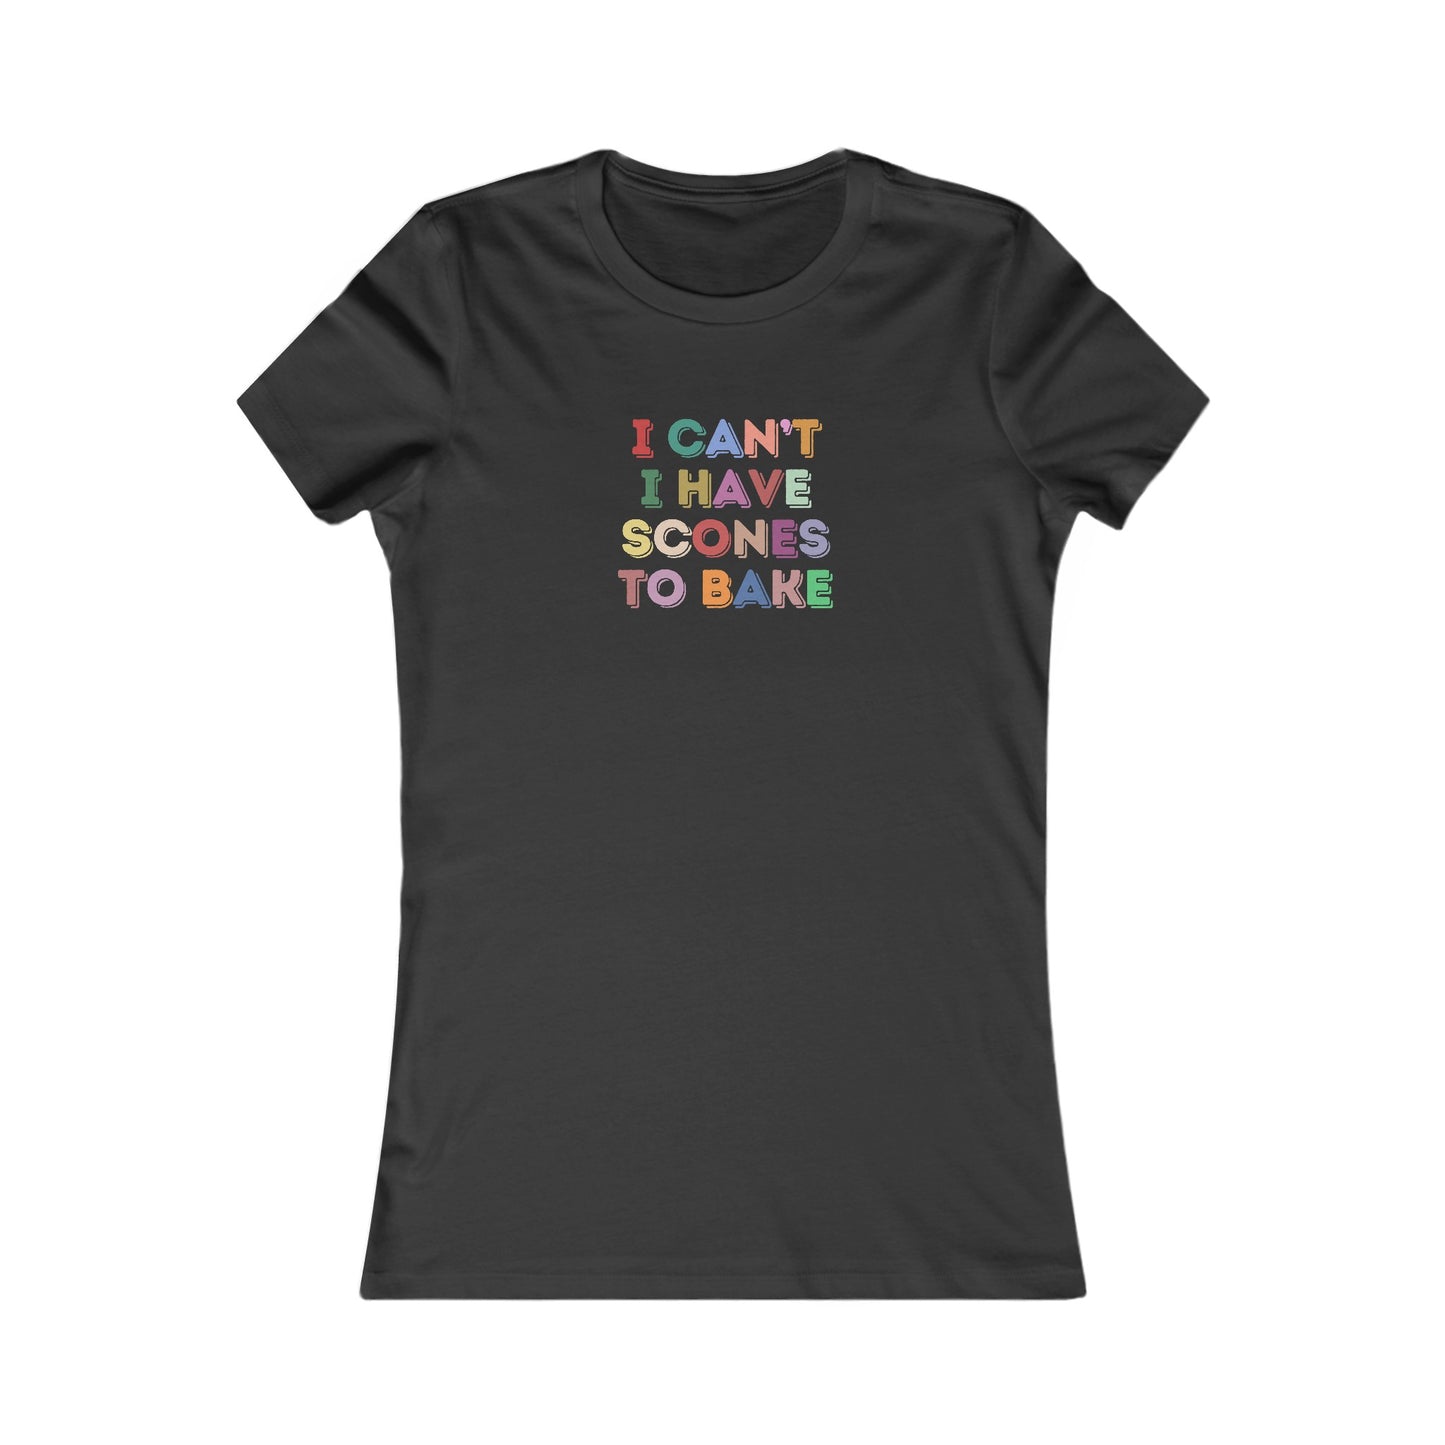 I Can't I Have Scones to Bake Women's T-Shirt